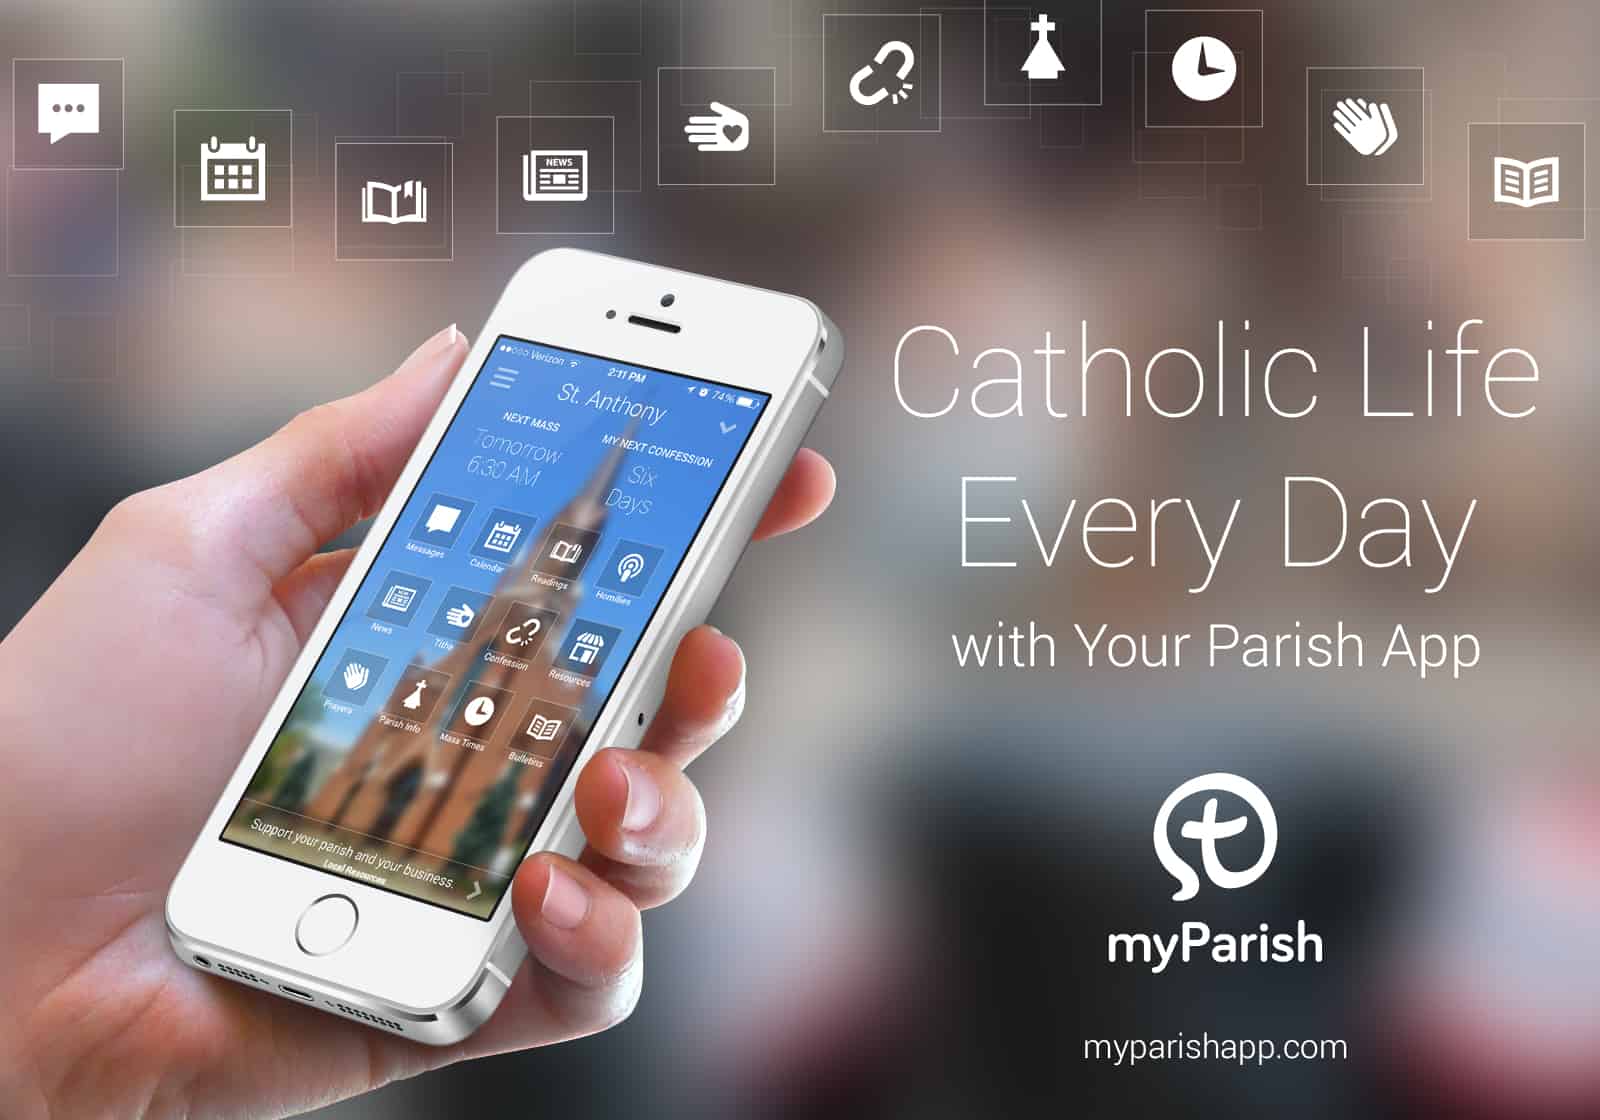 Don’t Forget to Download myParish App!